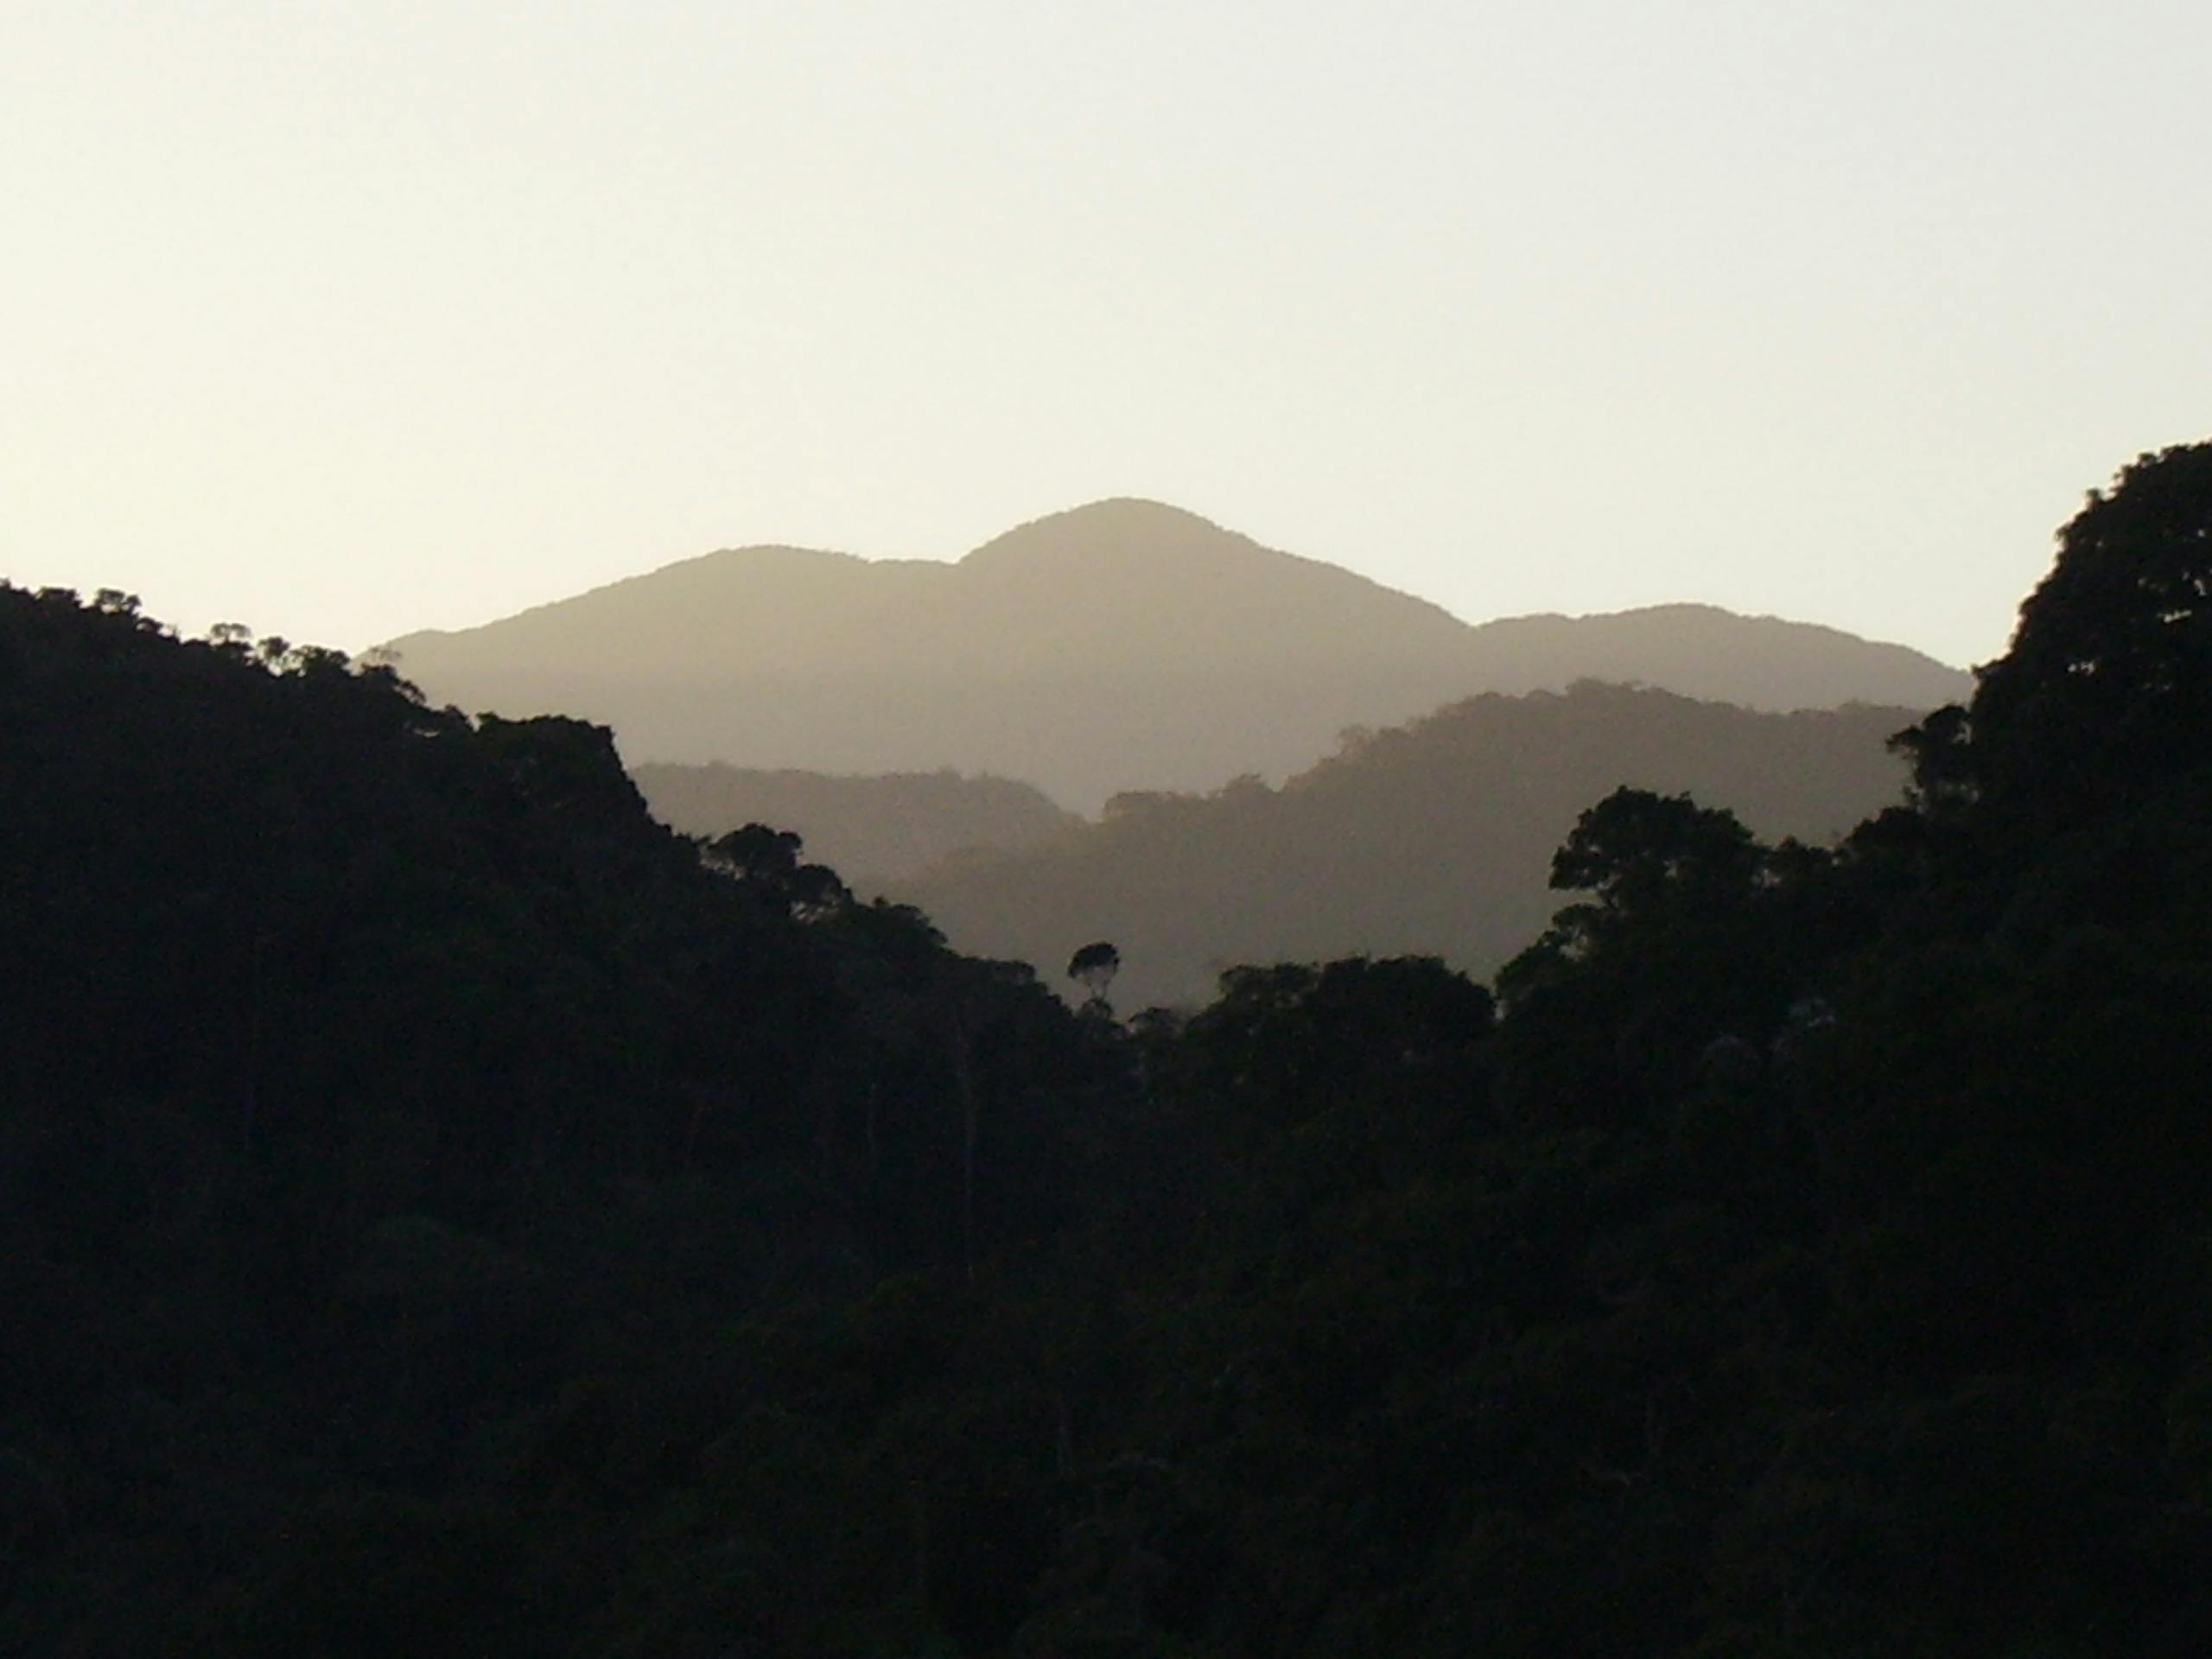 Free stock photo of mountains, silhouetted